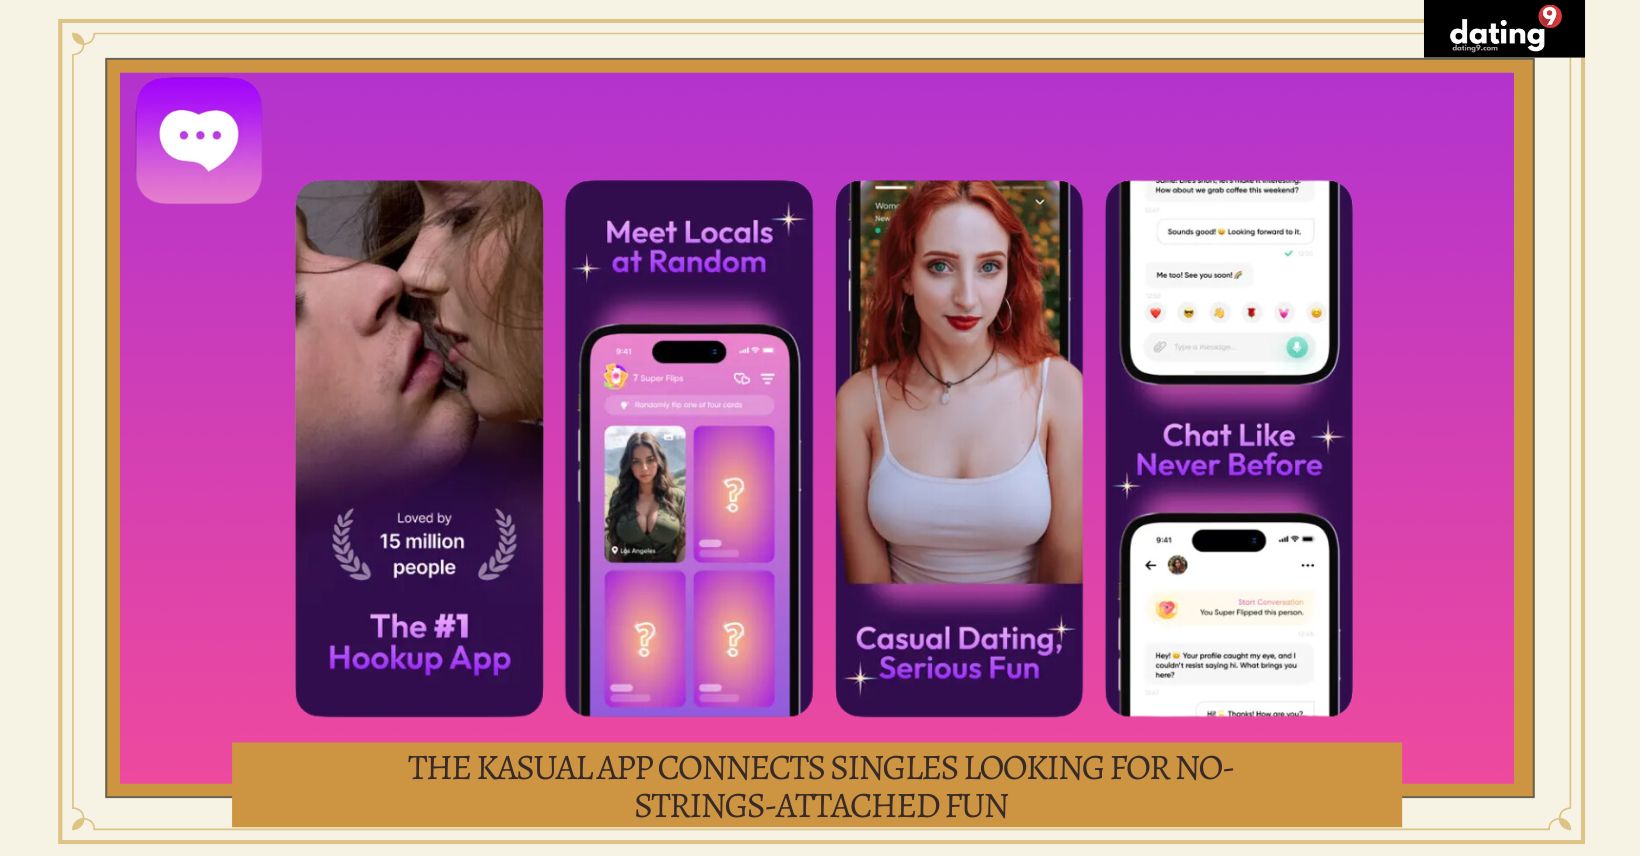 The Kasual App Connects Singles Looking for No-Strings-Attached Fun